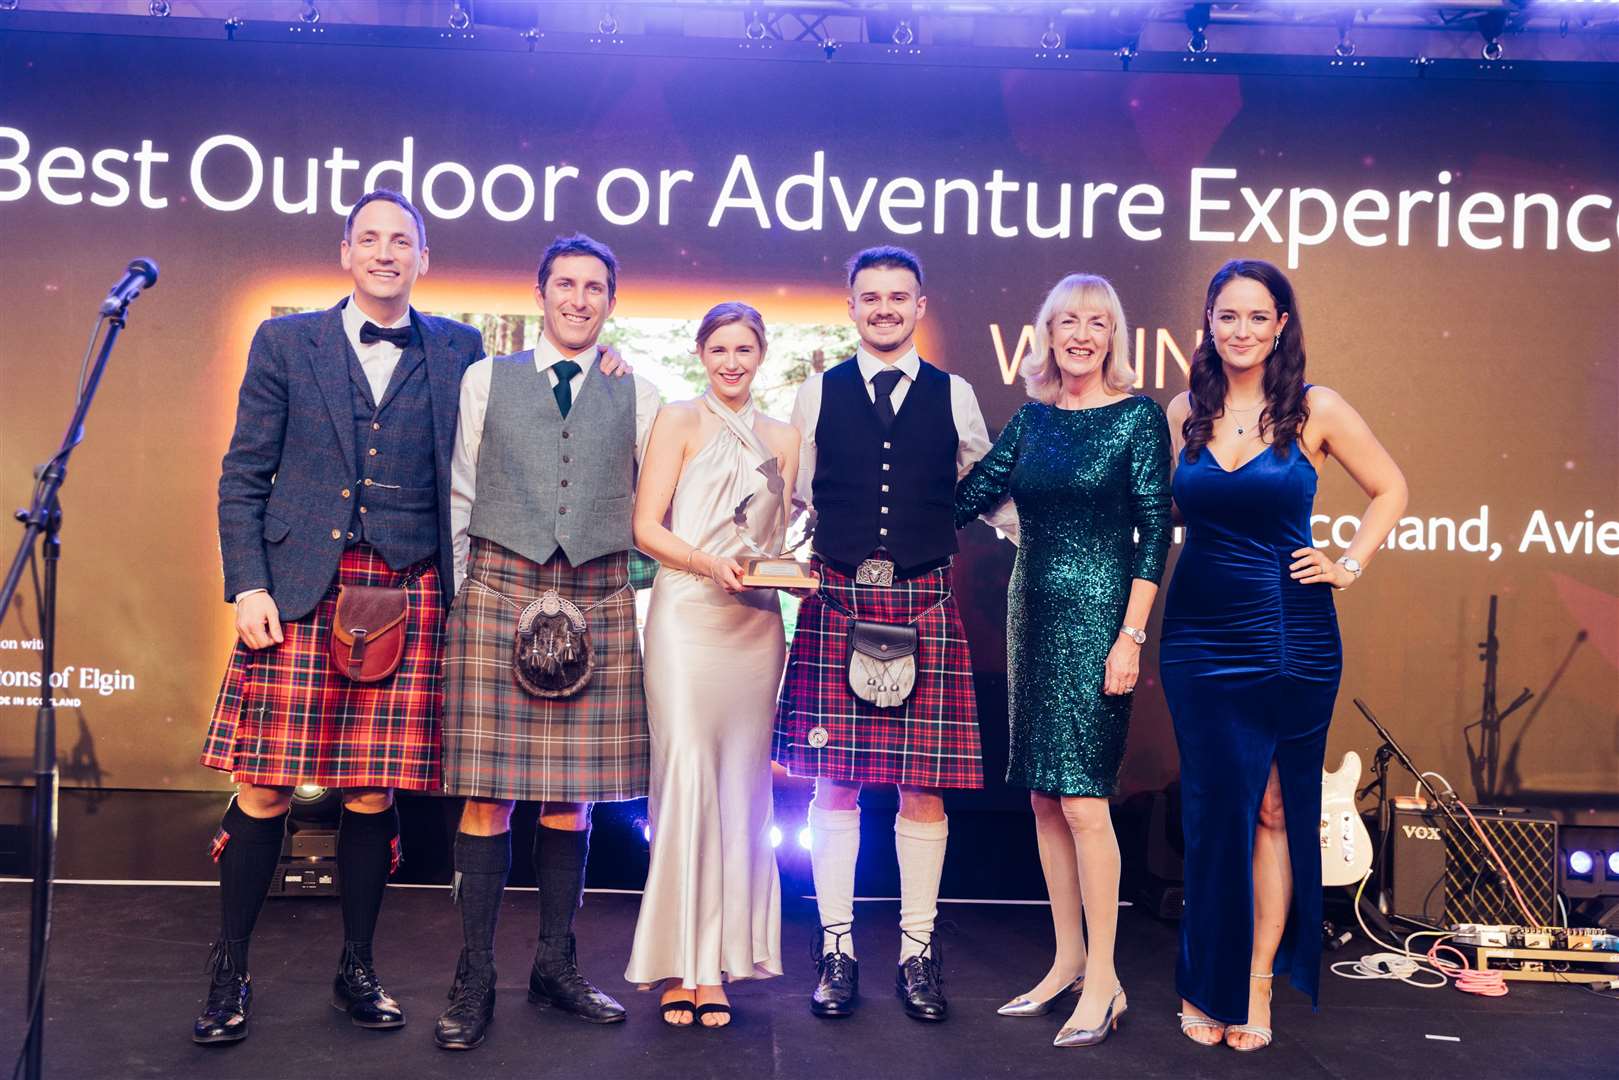 Gary Innes, Ben Thorburn, Emily Schaschke and Arran Goddard from Best Outdoor or Adventure Experience award winner, Wilderness Scotland, with Anne Anderson, VisitScotland board member and presenter Jennifer Reoch. Picture: Connor Mollison